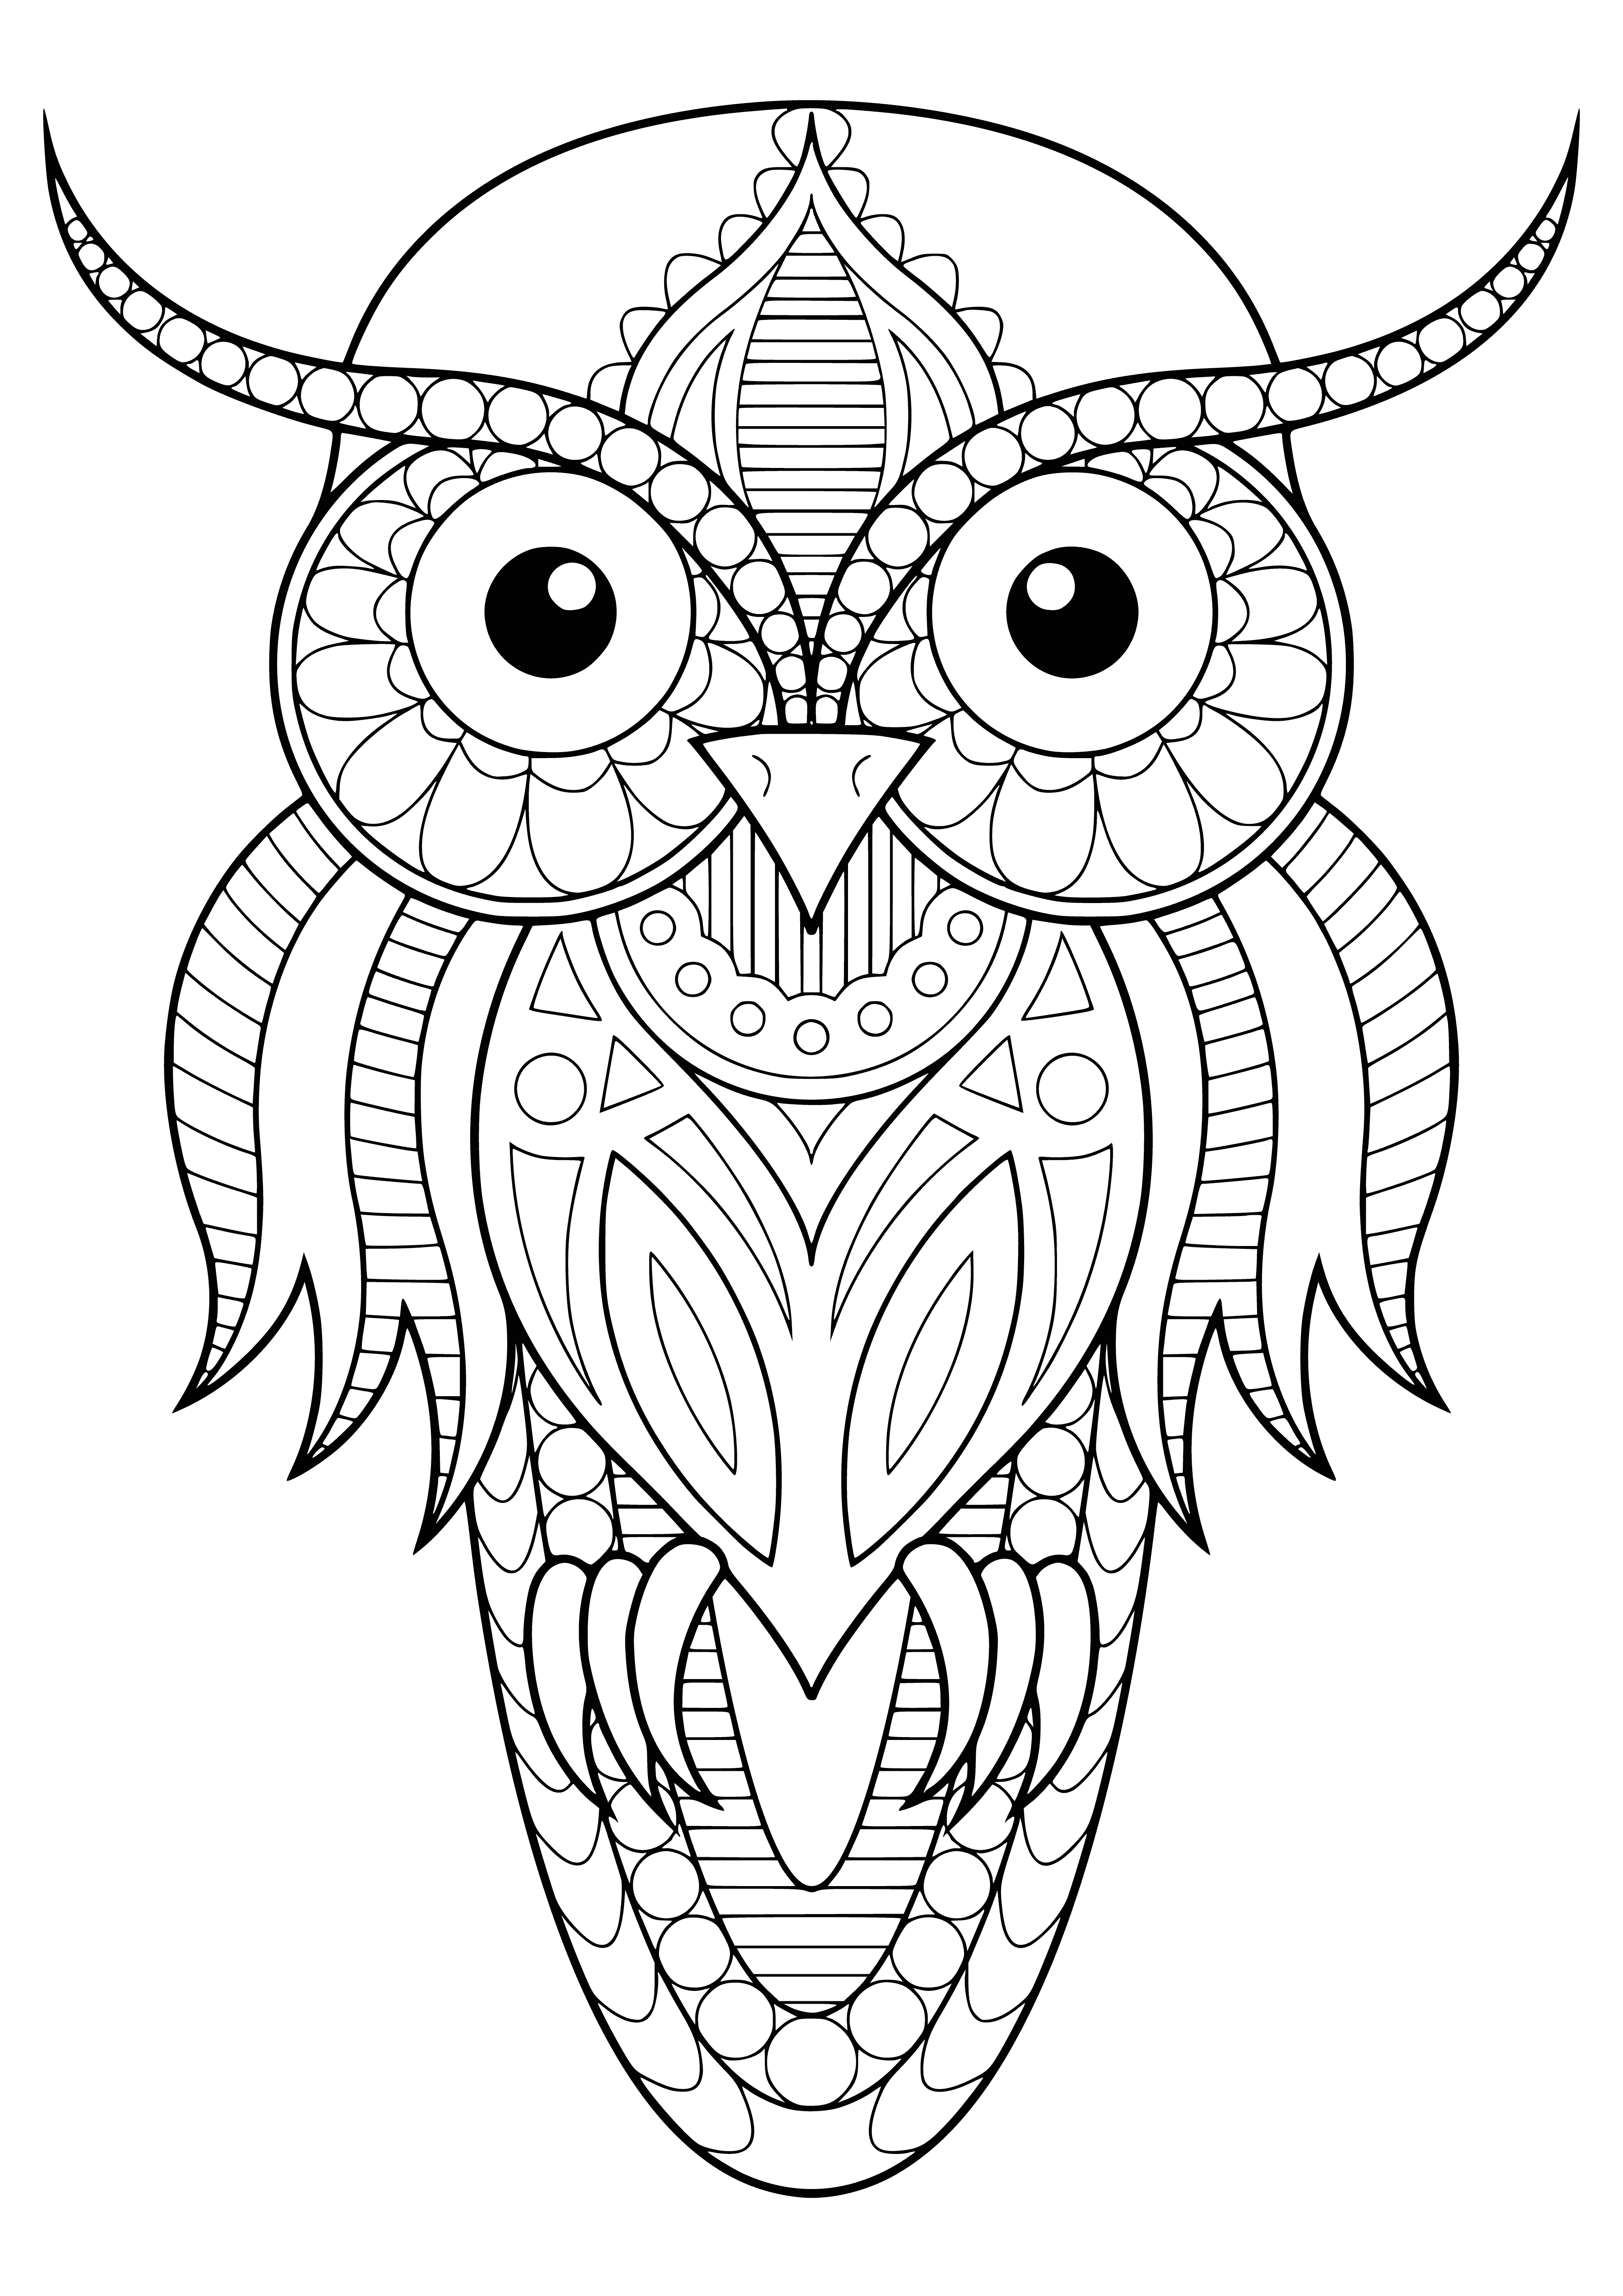 coloring page: Two owls perched on a branch, one with wings spread wide, mesmerizing colors swirl around them.